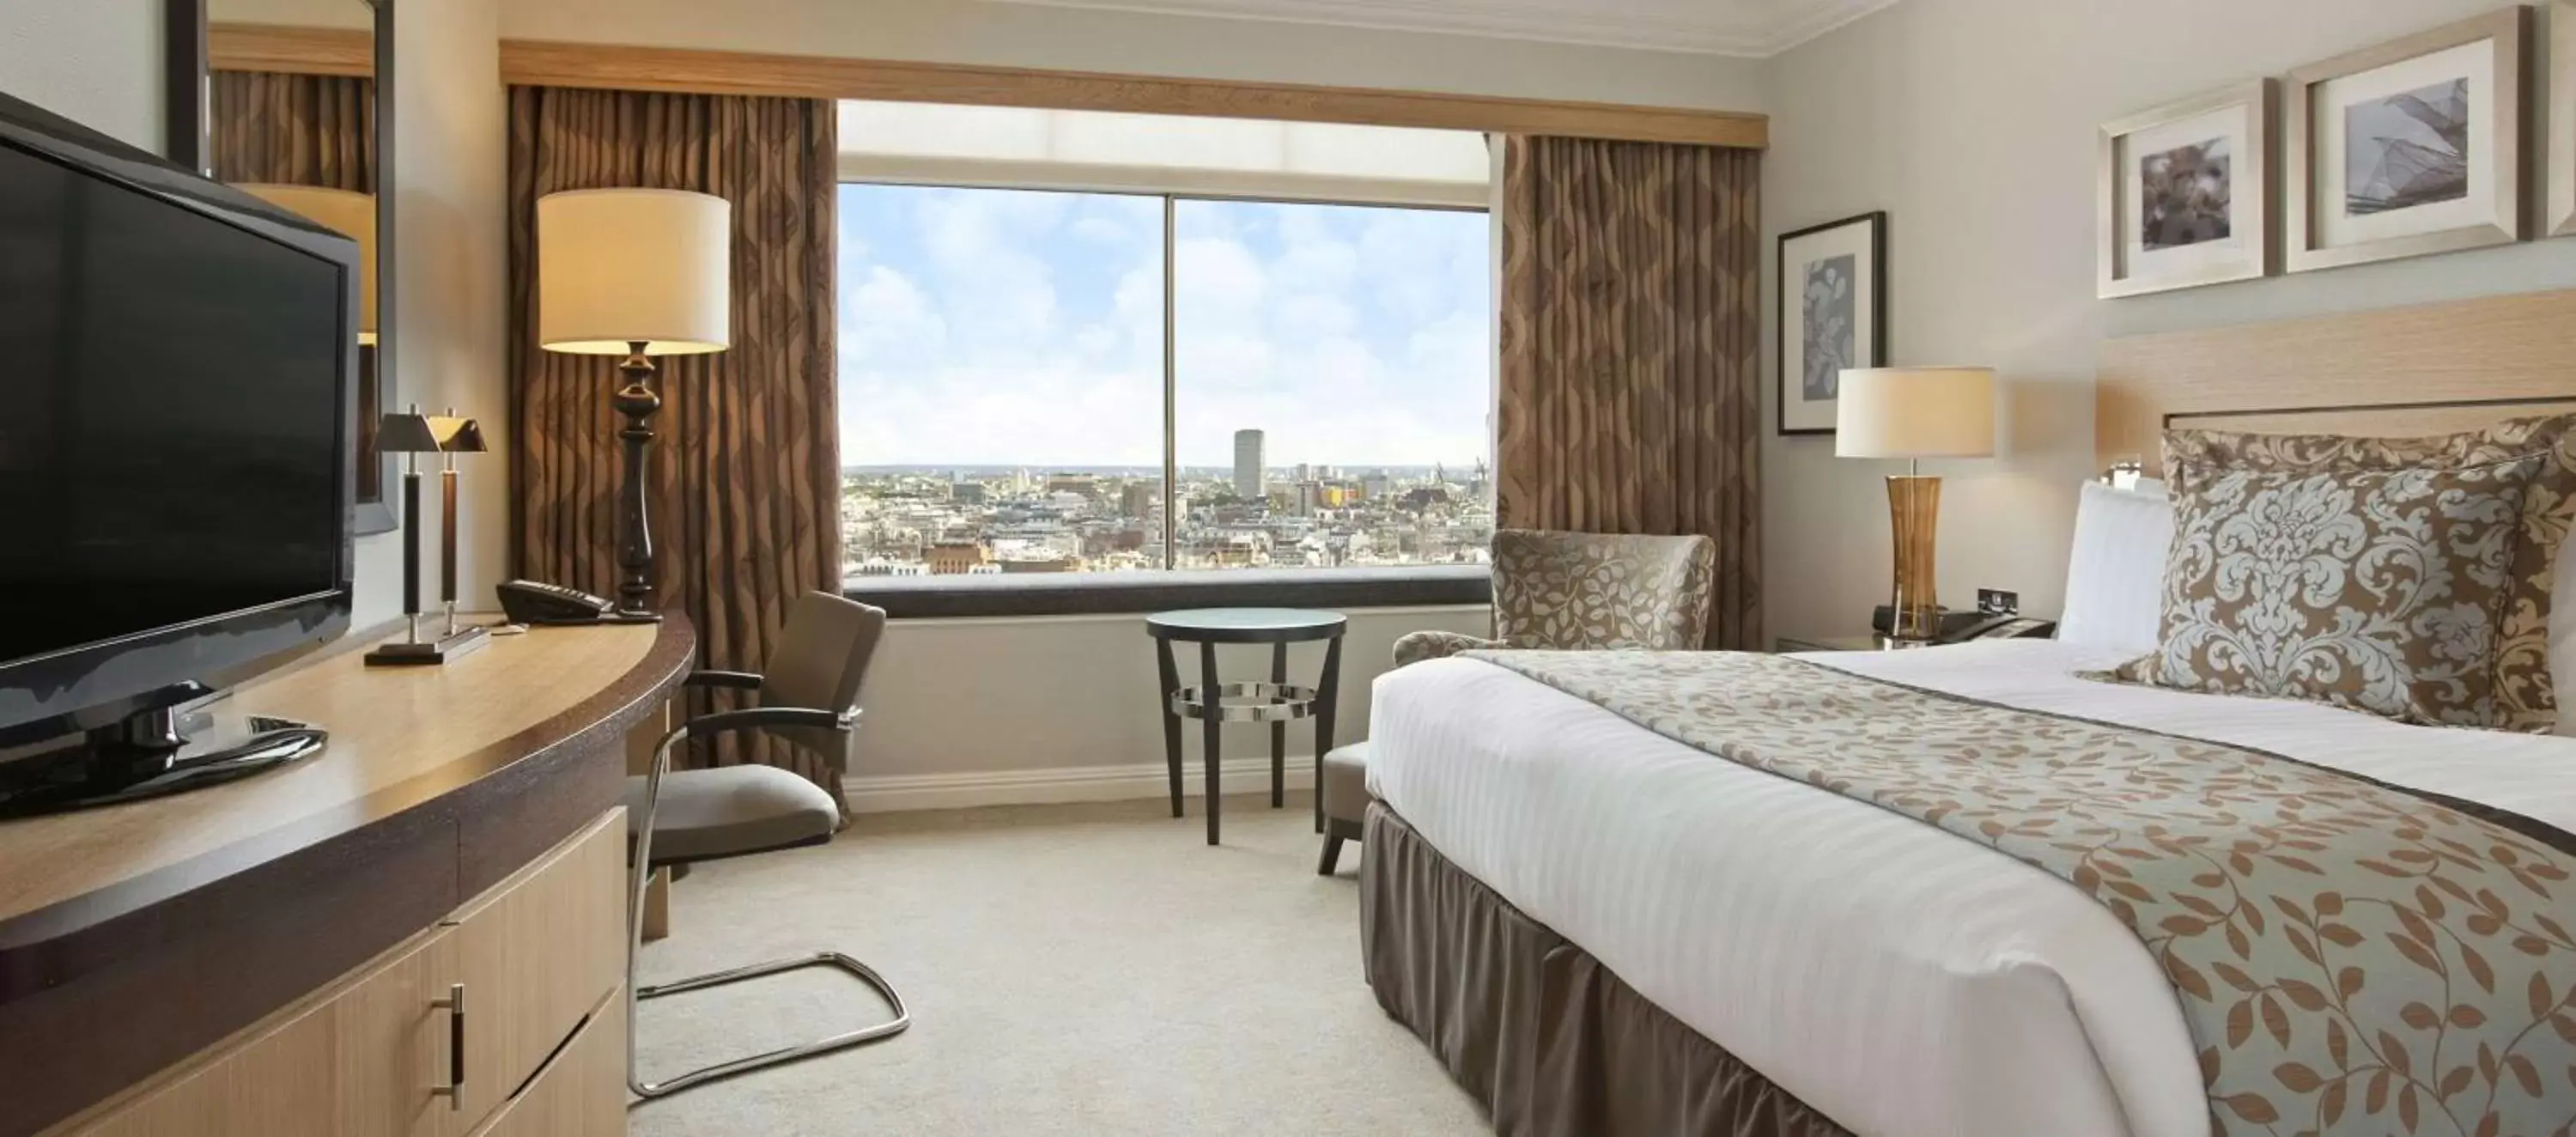 Executive King Room with Lounge Access in London Hilton on Park Lane